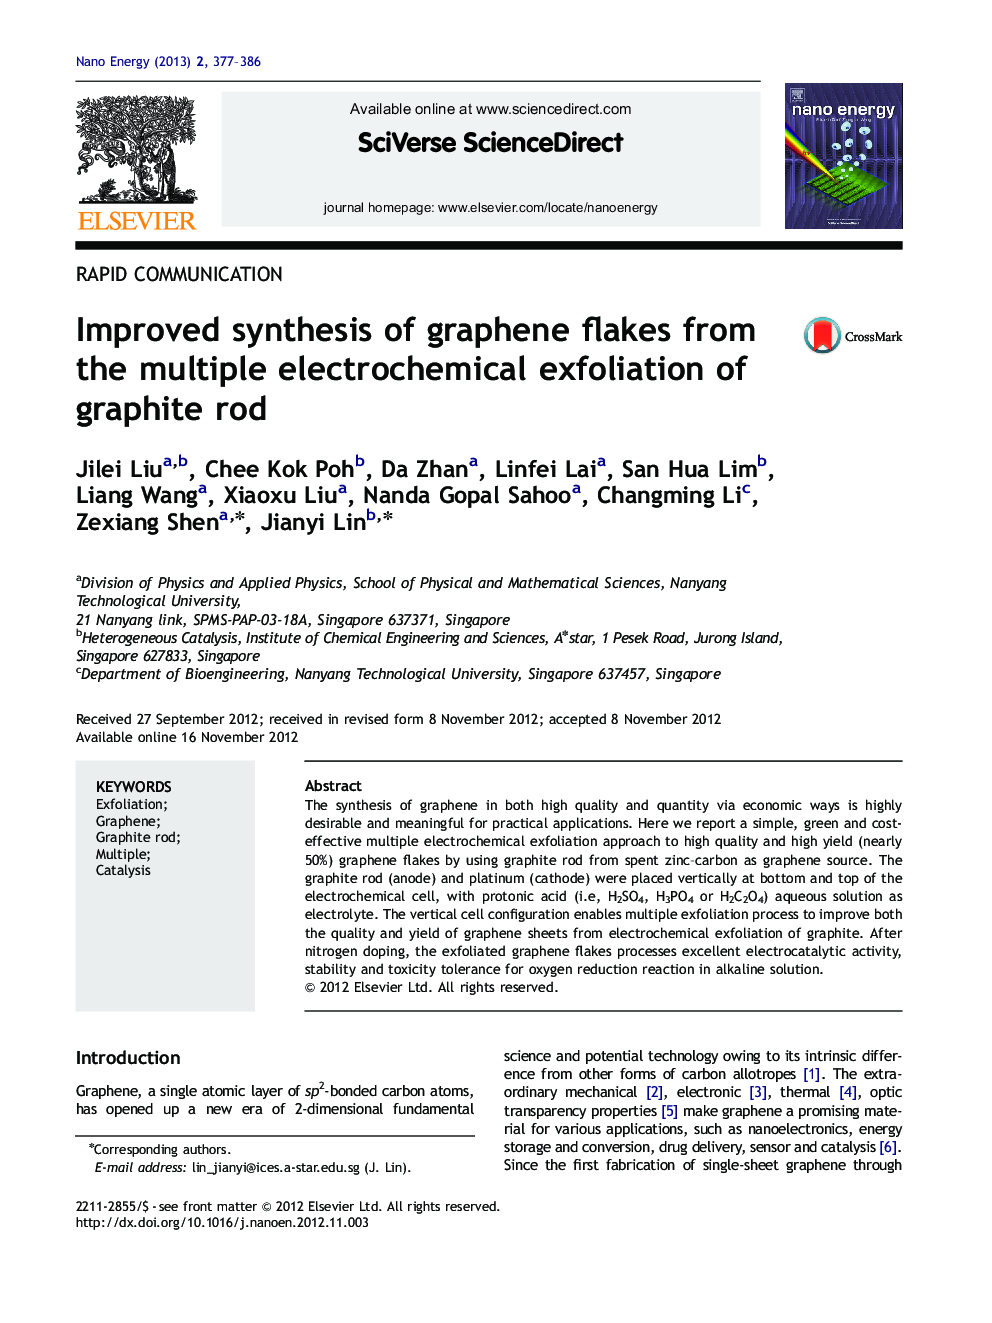 Improved synthesis of graphene flakes from the multiple electrochemical exfoliation of graphite rod